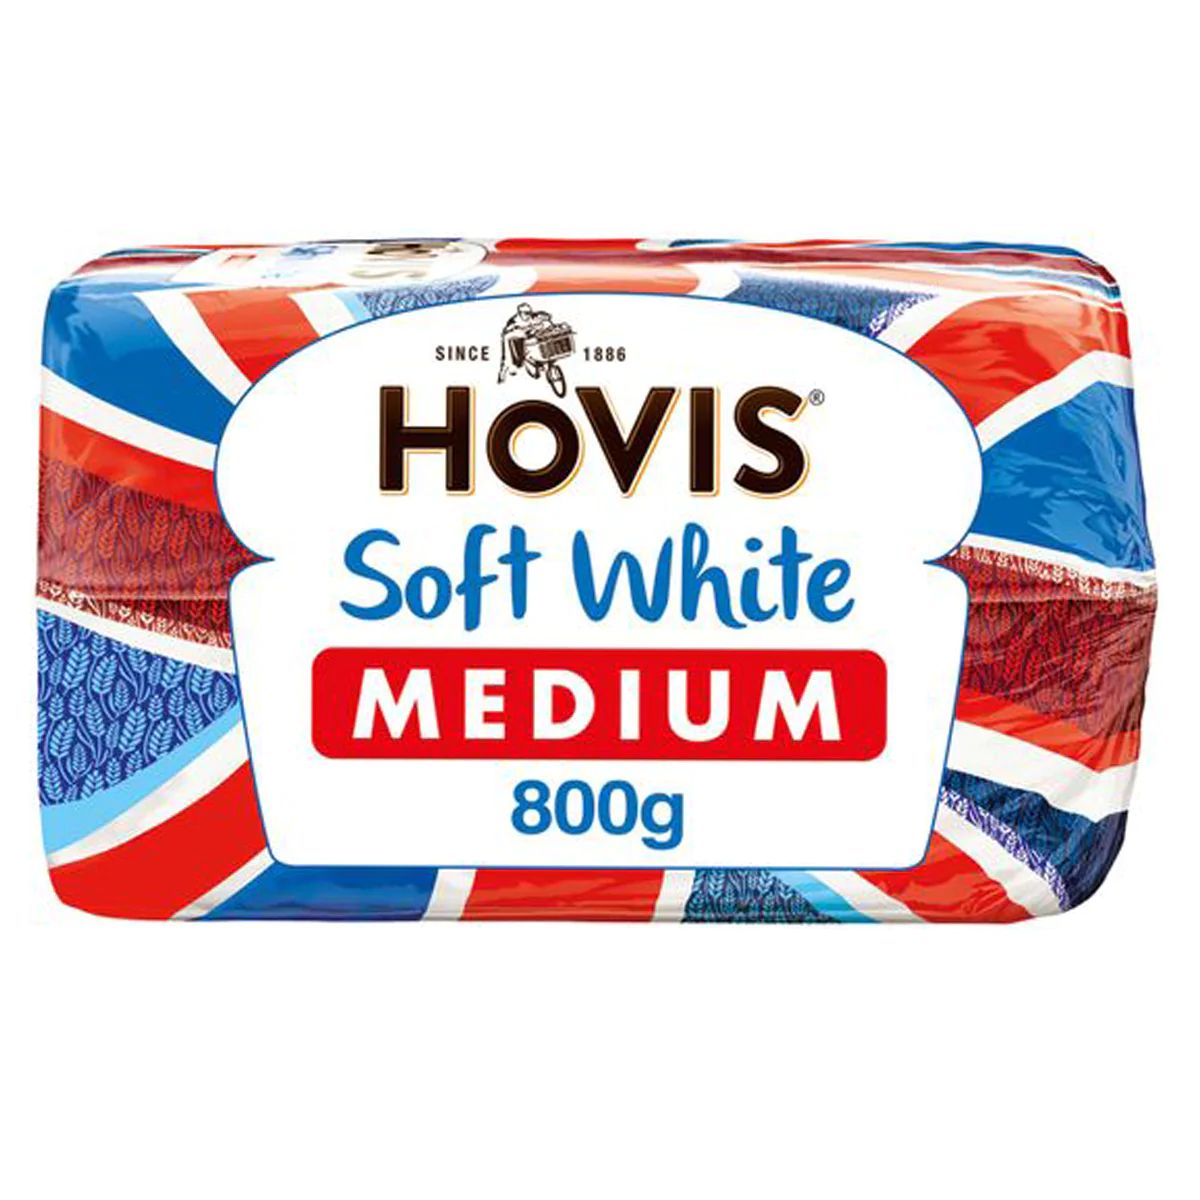 A package of Hovis - Soft White Medium Bread - 800g.